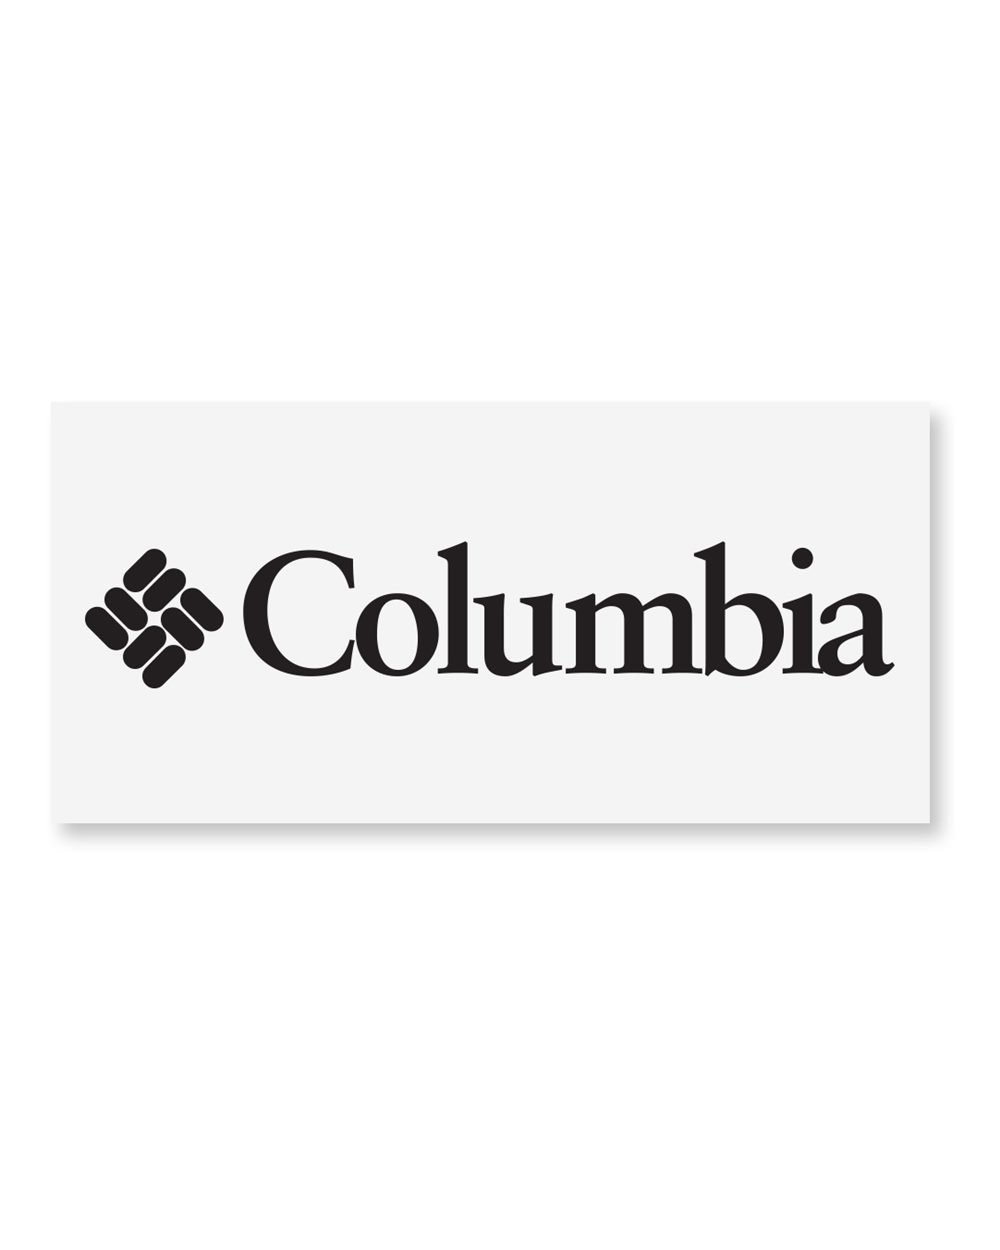 Marketing_SHWRM_SIGN_Columbia_Sign_Front_High.jpg